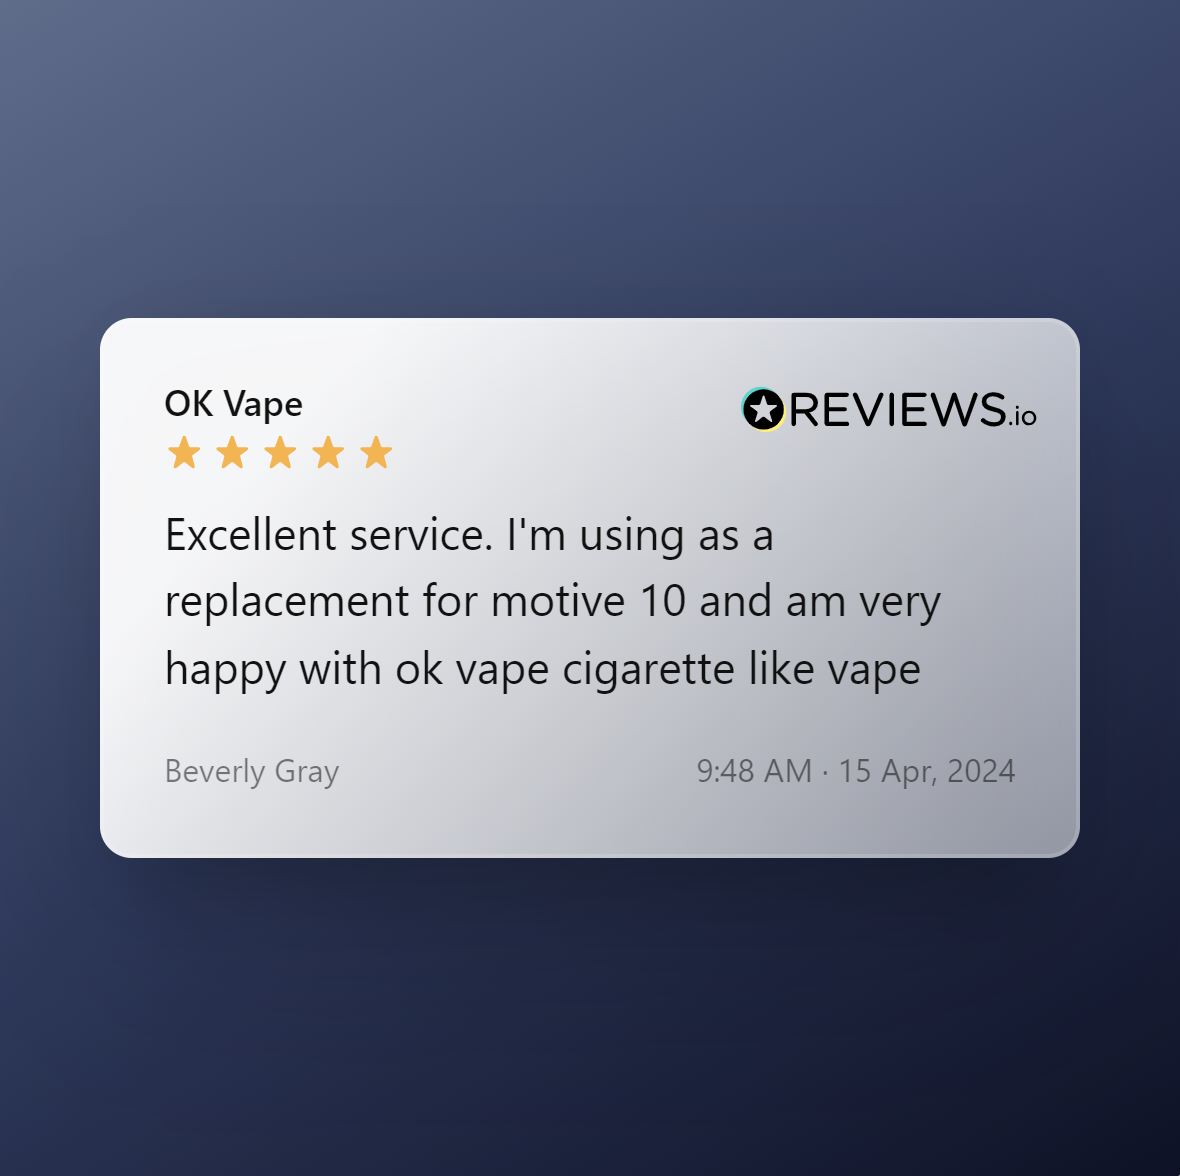 I'm using as a replacement for 10 Motives and am very happy - OK Vape Review